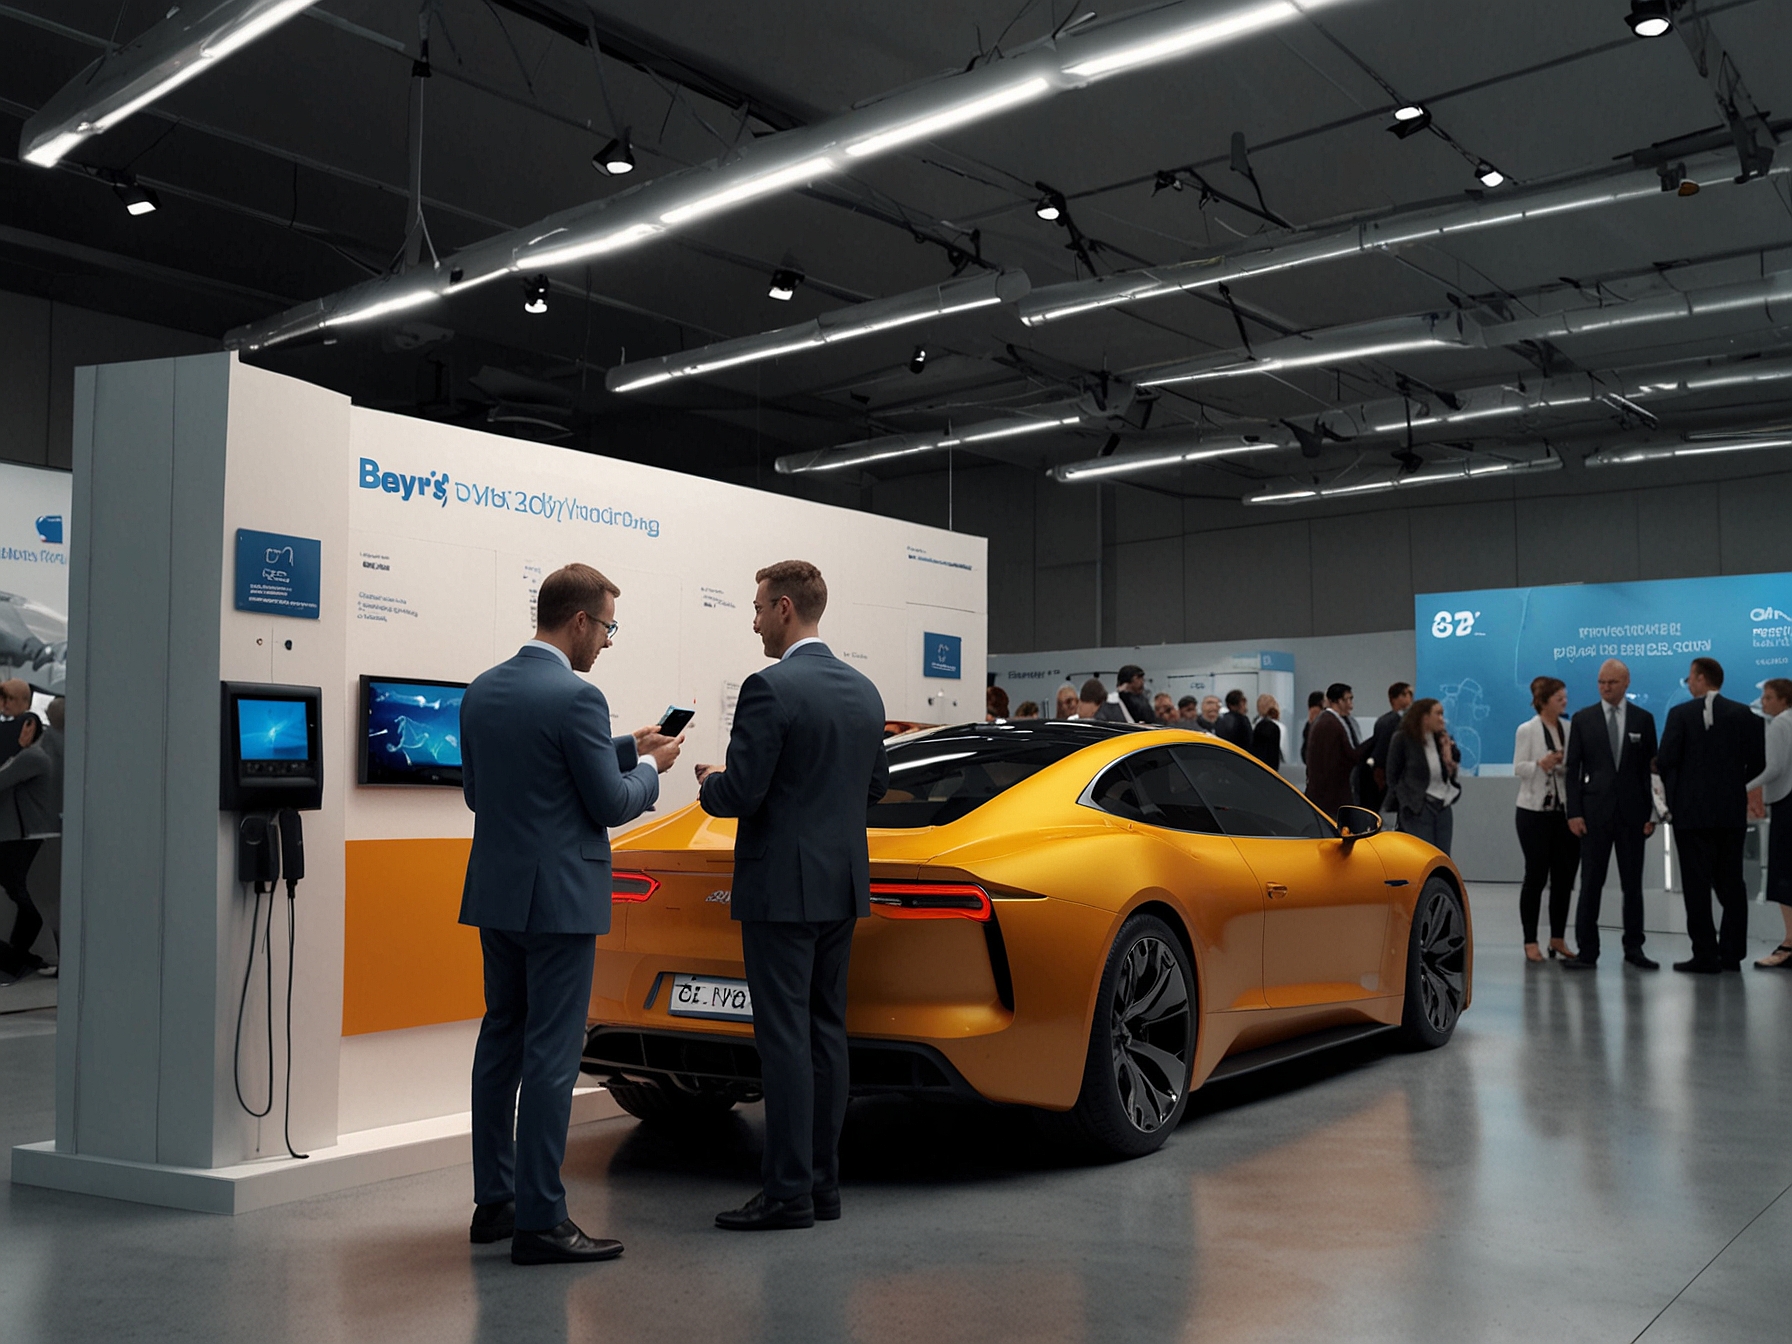 Attendees learning about Beny's EVB brand at Intersolar Europe 2024, showcasing advanced electric vehicle chargers and rapid charging systems integrated with network technologies.